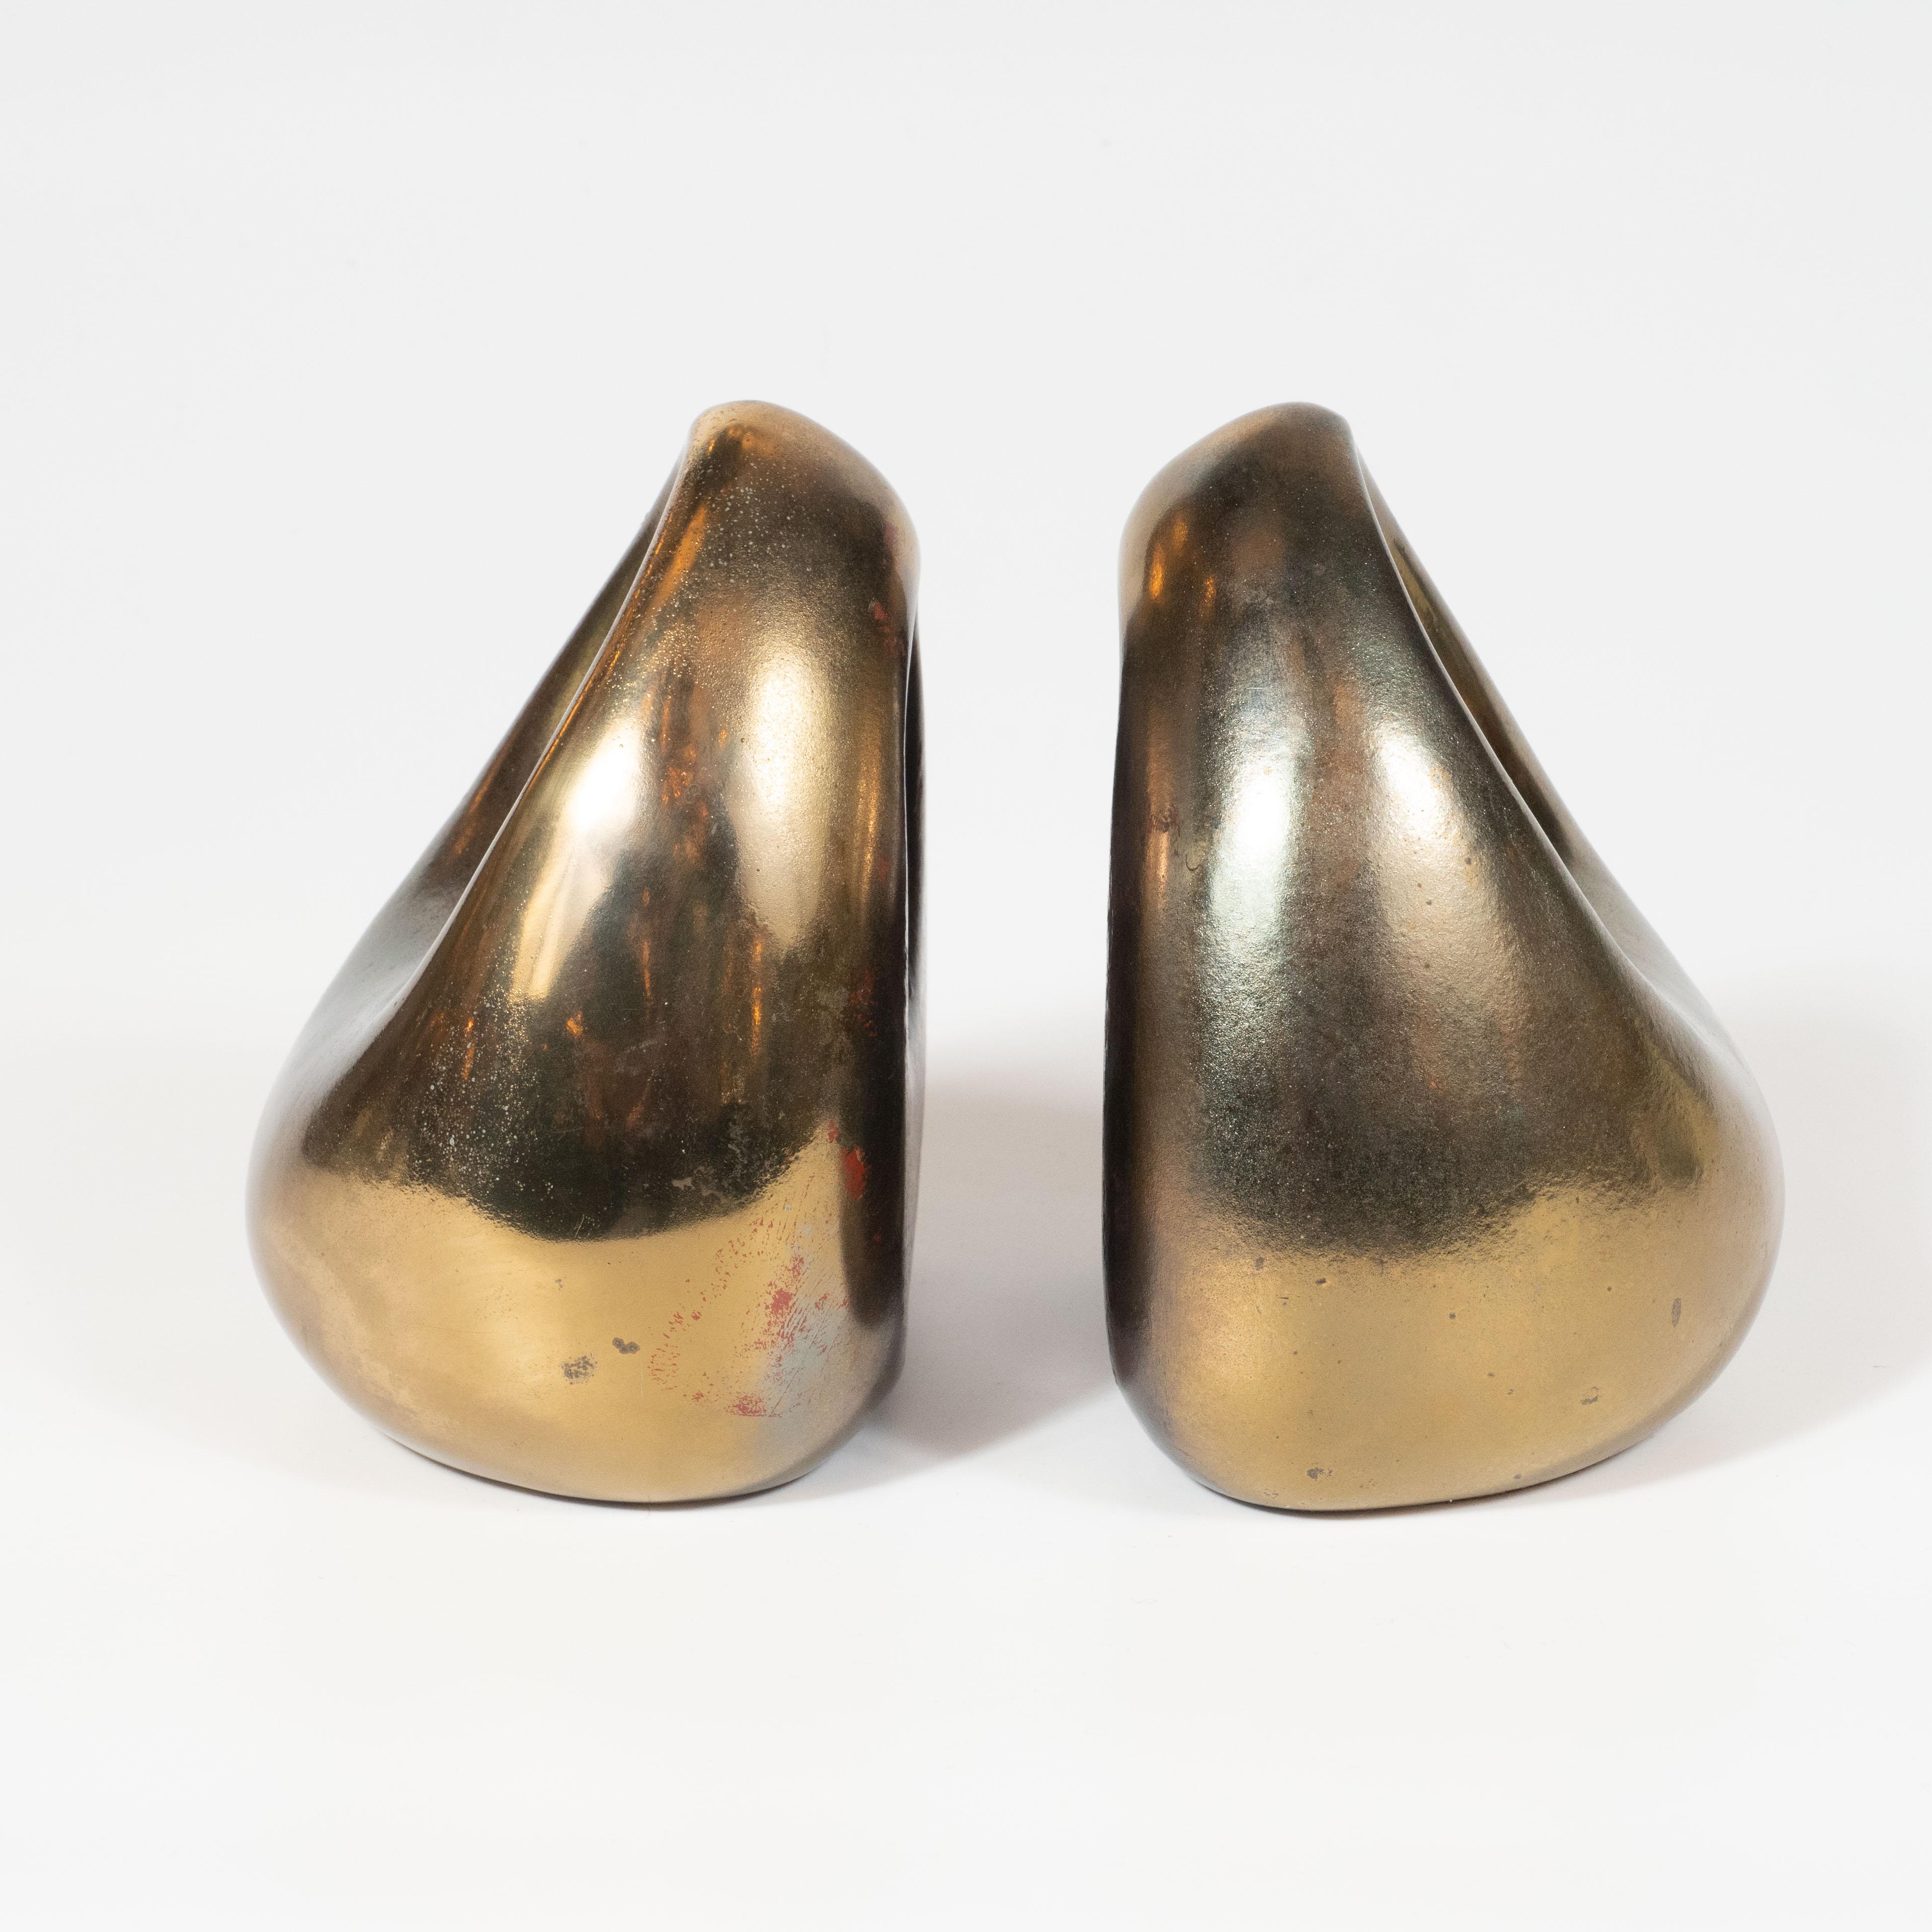 Mid-Century Modern Midcentury Antique Gold Tear Drop Bookends with Circular Cut Outs by Ben Seibel